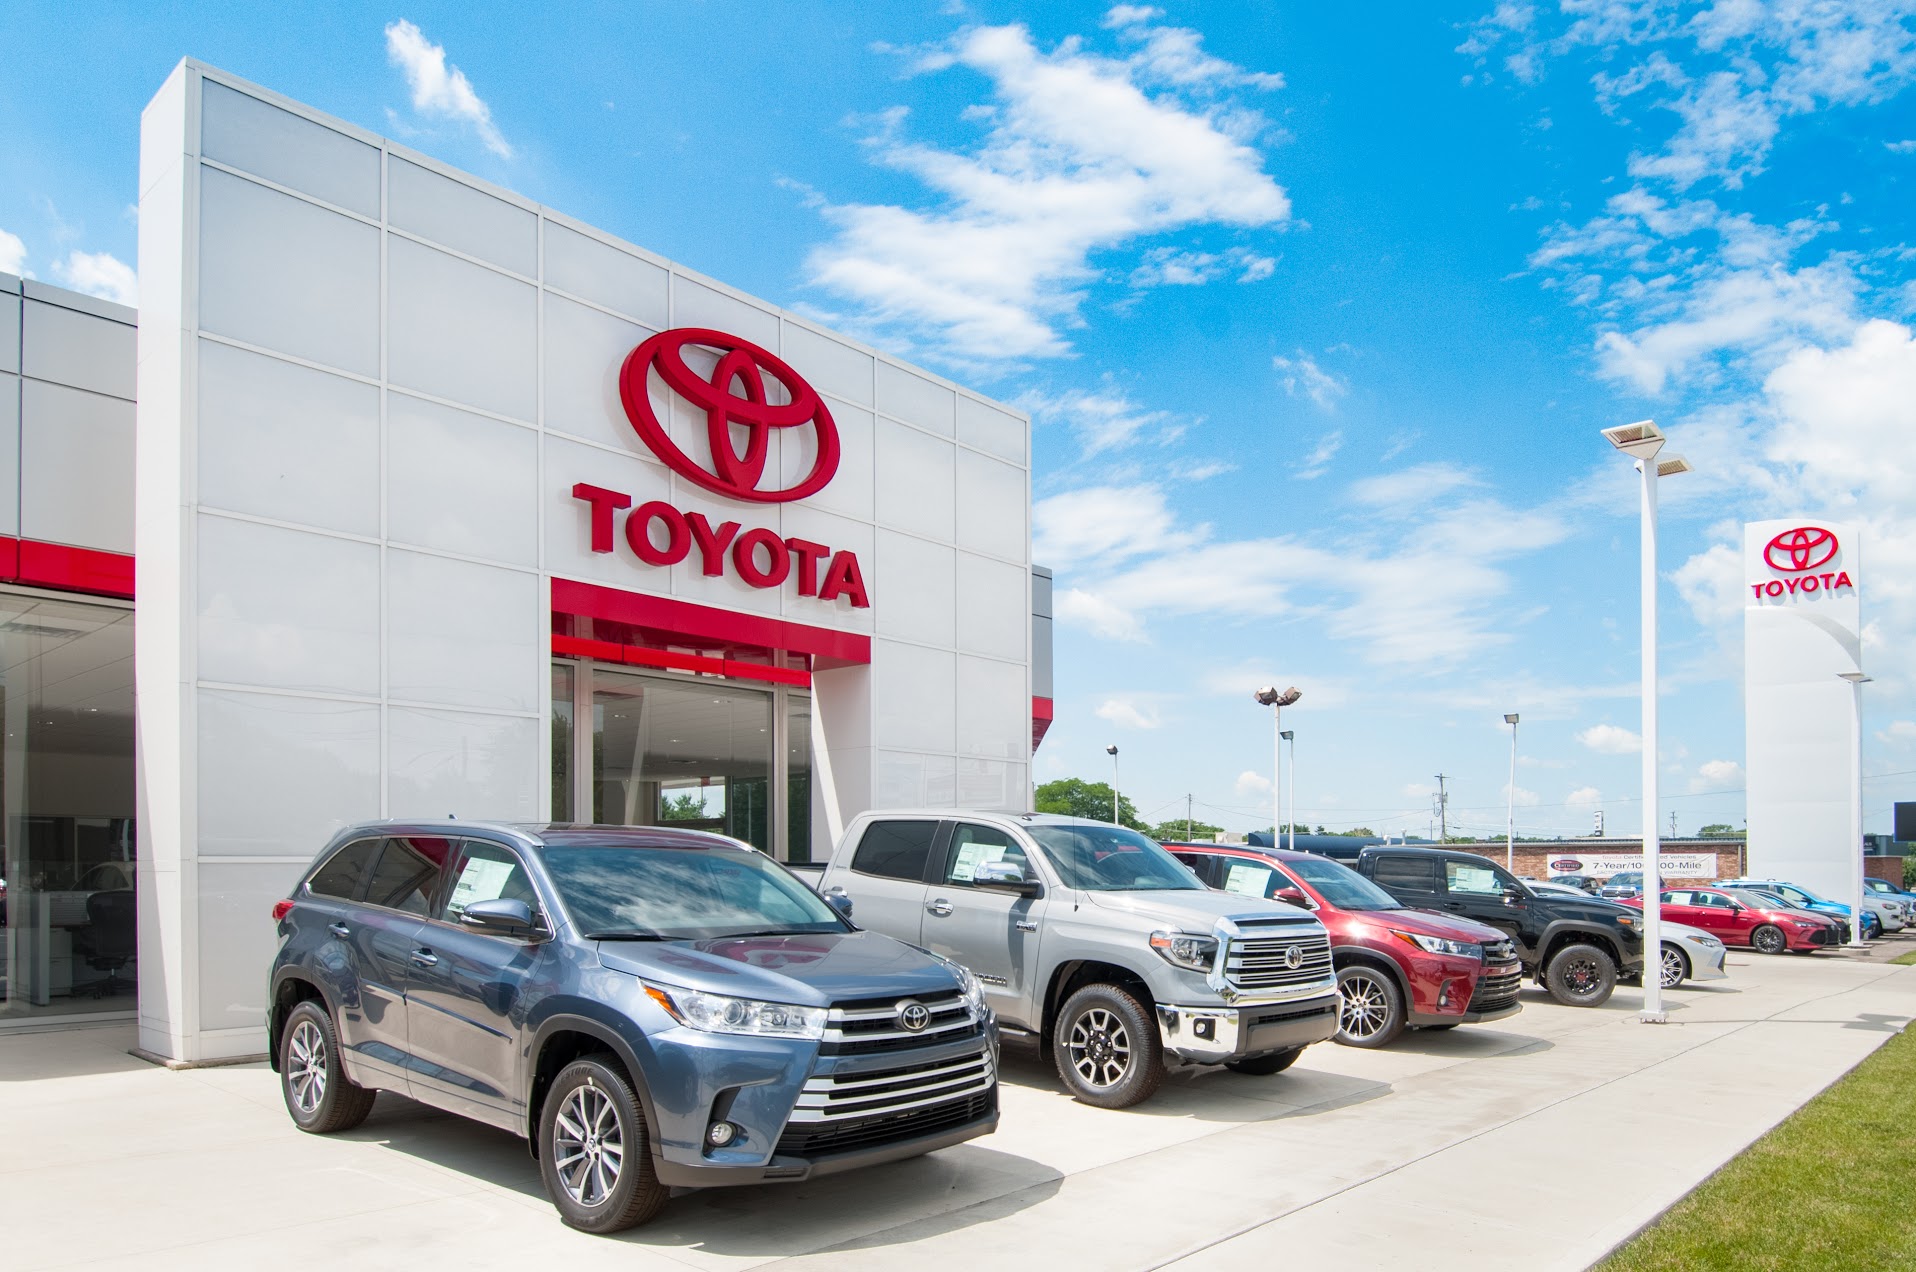 New and Used Toyota Dealer Marion | McDaniel Toyota Near Me Bucyrus